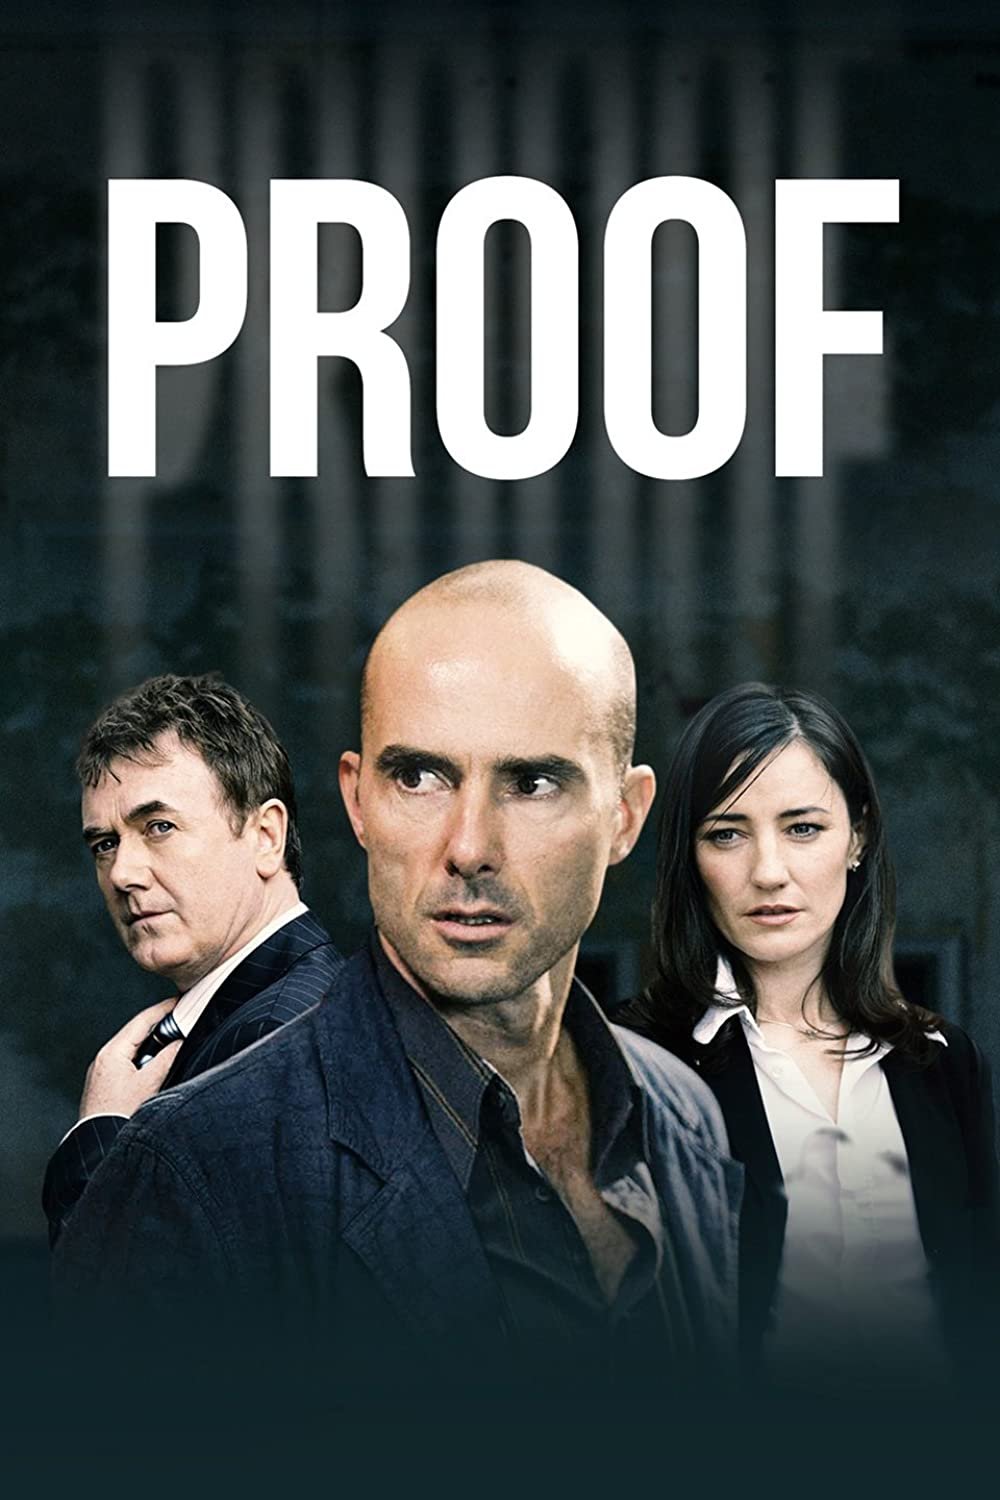 Poster of the movie Proof